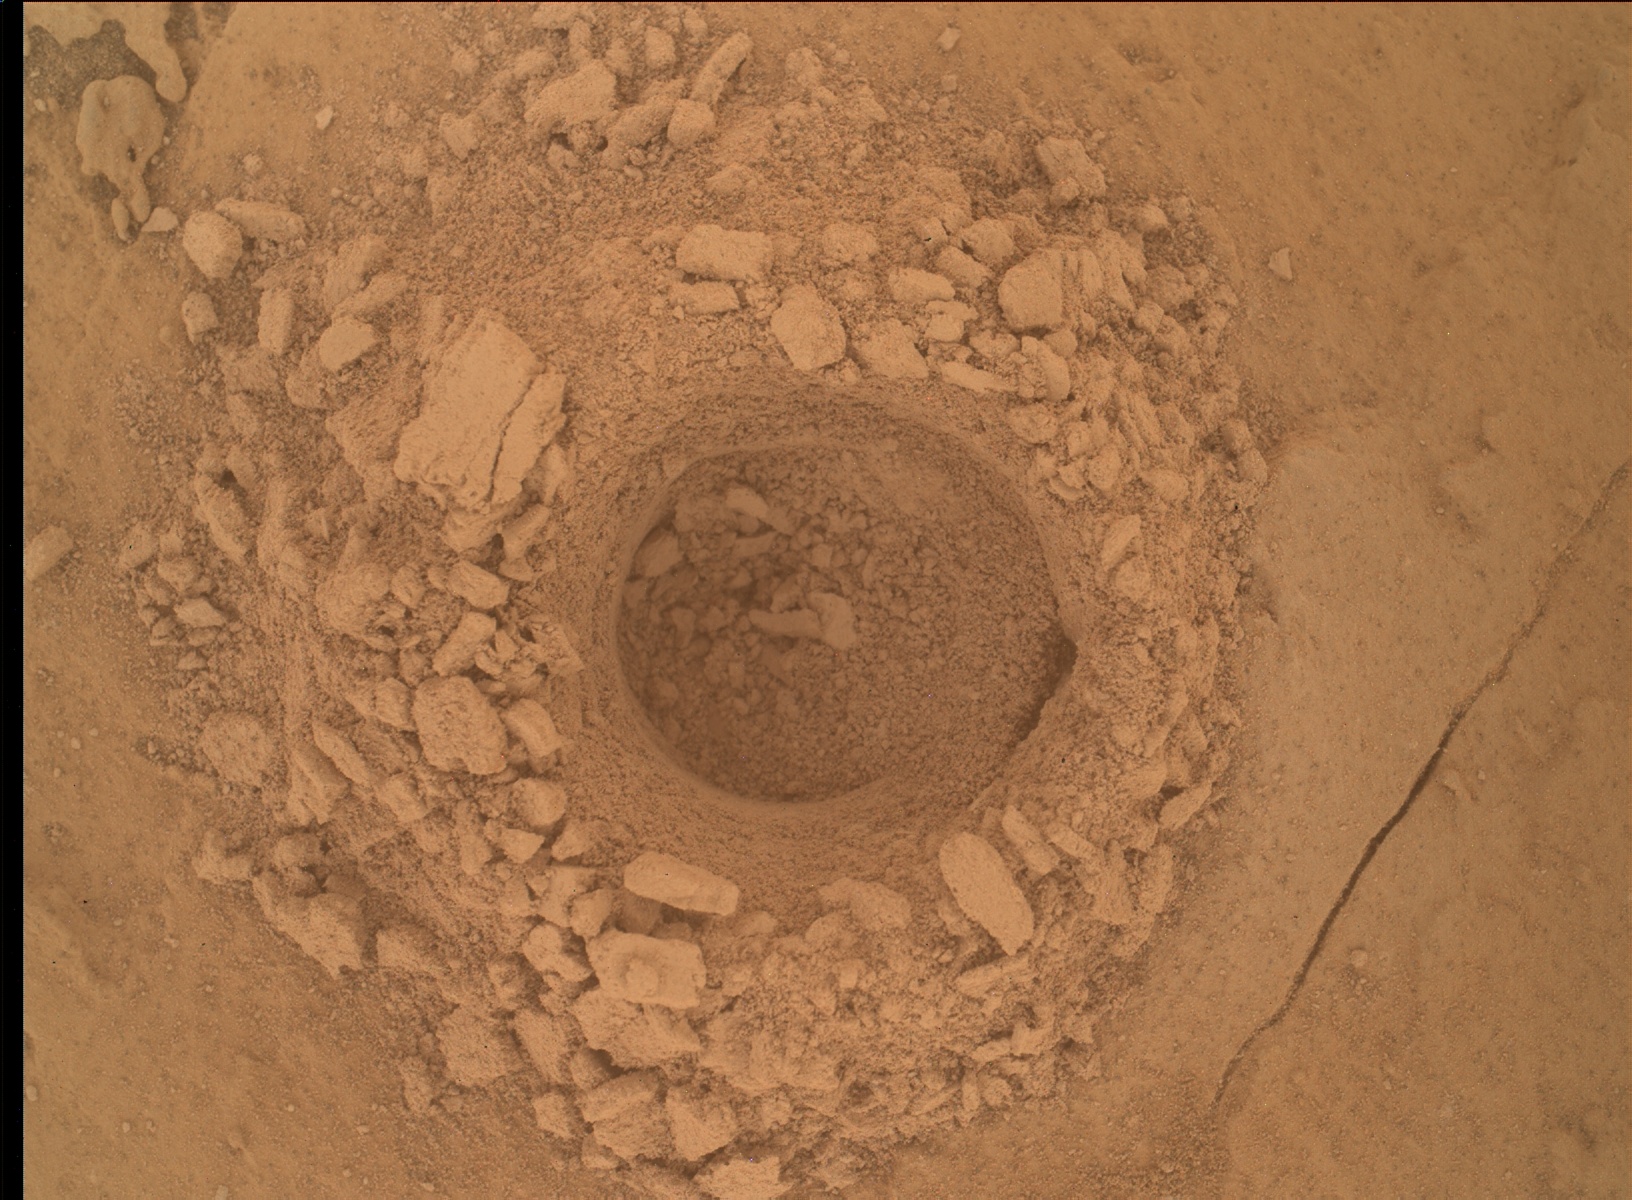 Nasa's Mars rover Curiosity acquired this image using its Mars Hand Lens Imager (MAHLI) on Sol 4028